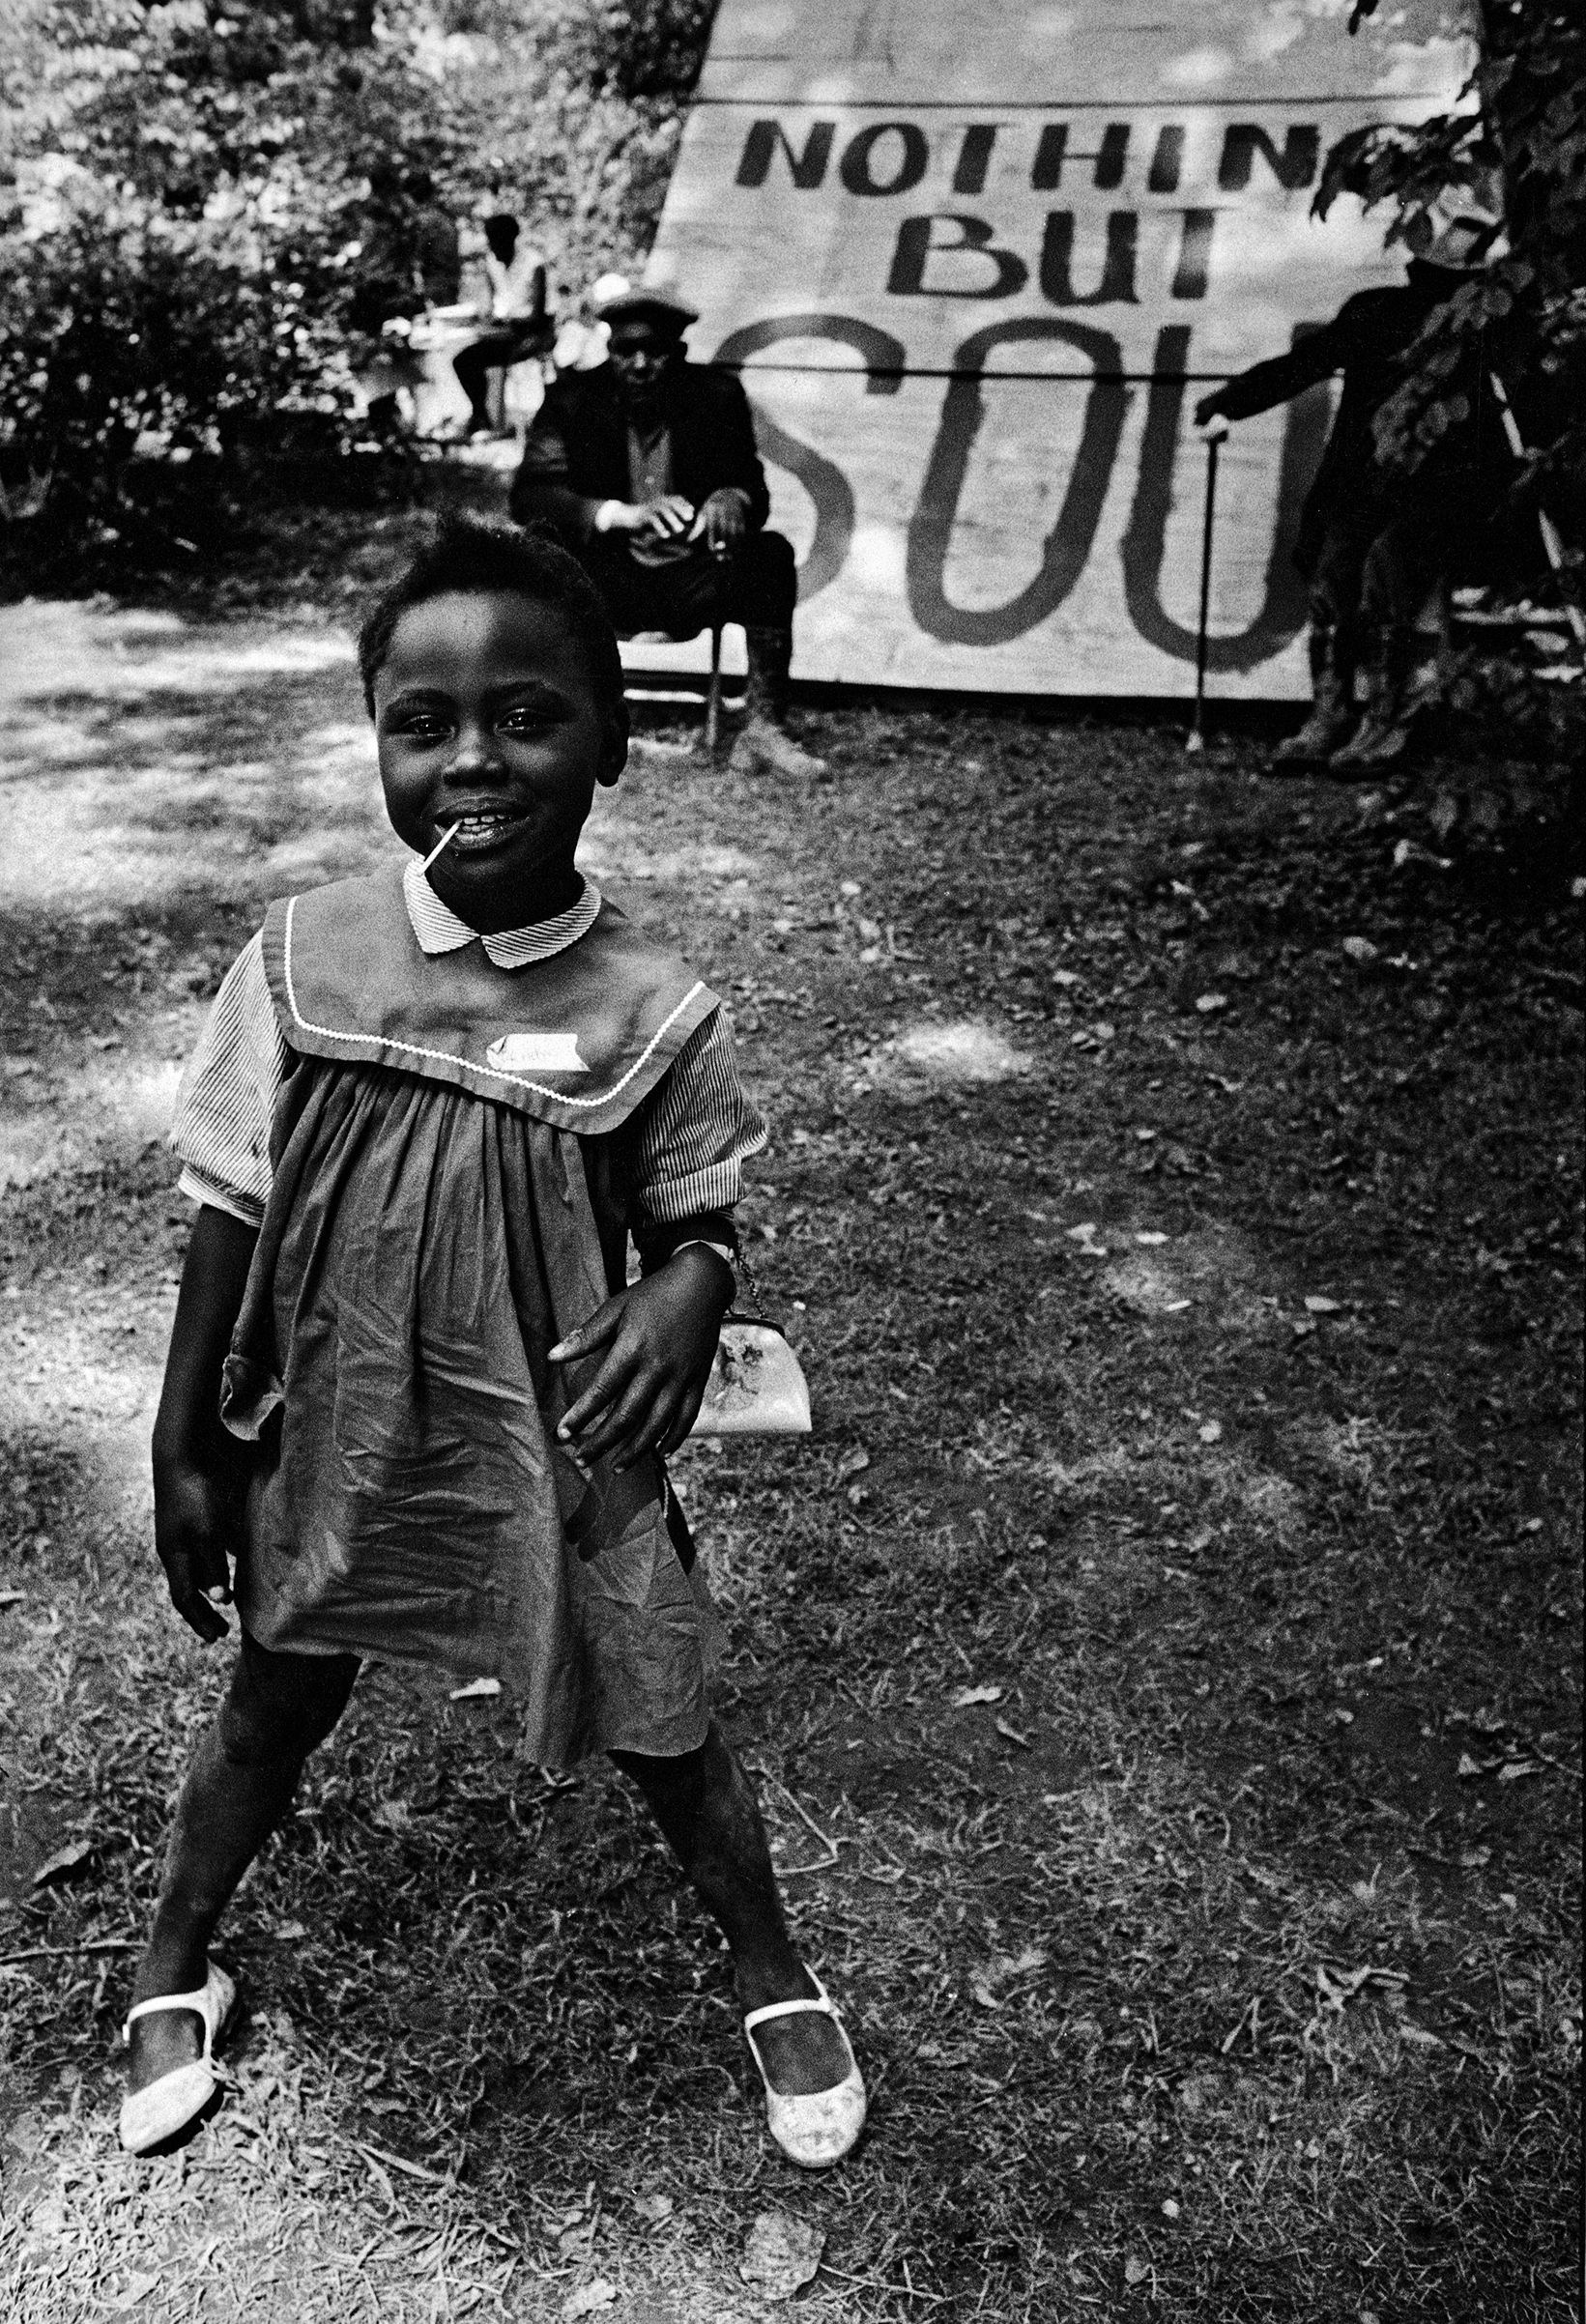 Ressurection City, Poor Peoples Campaign, 1968 by Jill Freedman.